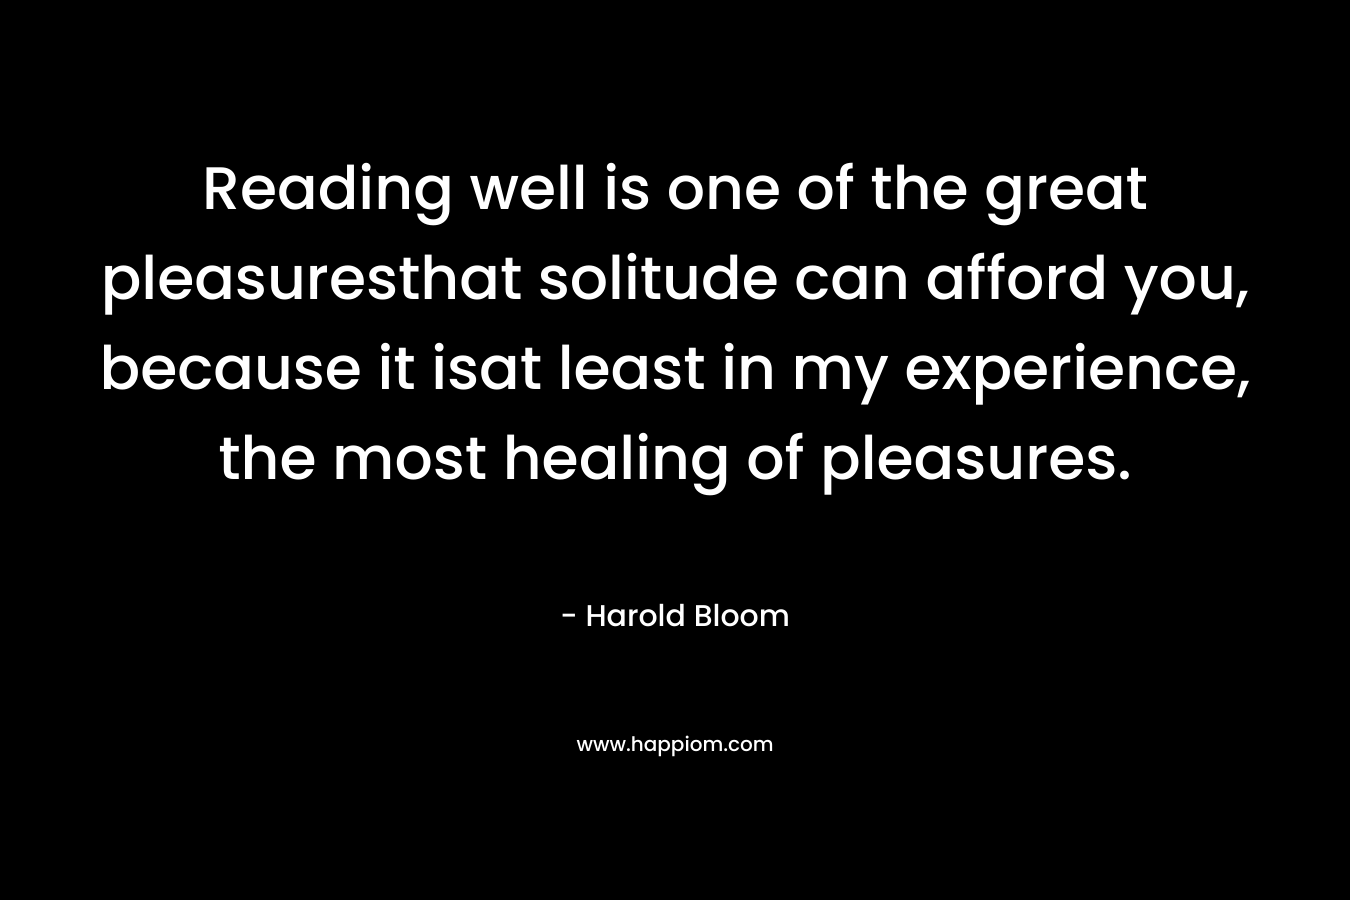 Reading well is one of the great pleasuresthat solitude can afford you, because it isat least in my experience, the most healing of pleasures. – Harold Bloom